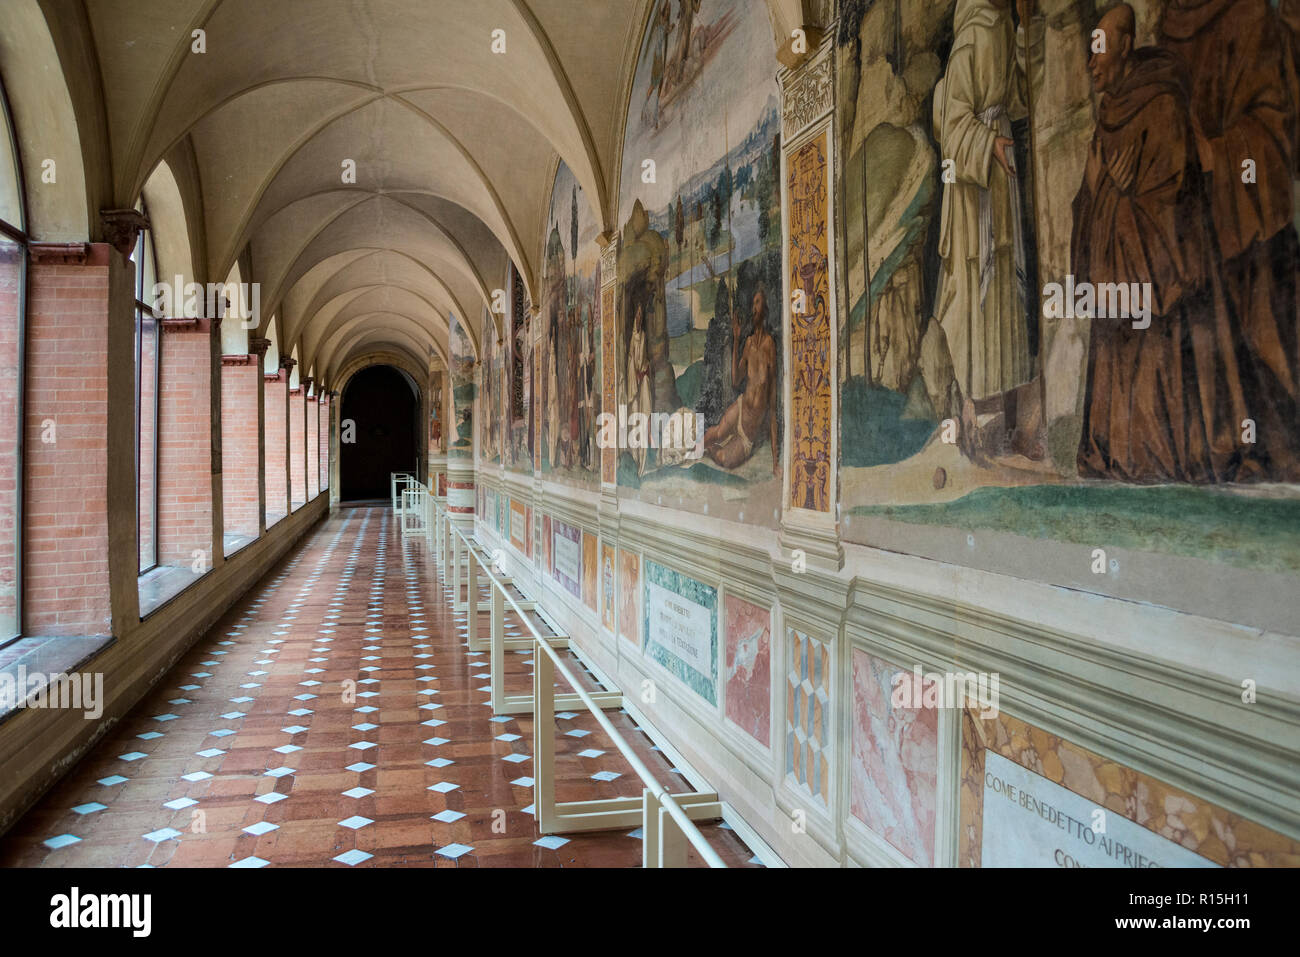 Frescos in the cloister of The Abbey of Monte Oliveto Maggiore (Benedictine monastery), Tuscany, Italy Stock Photo